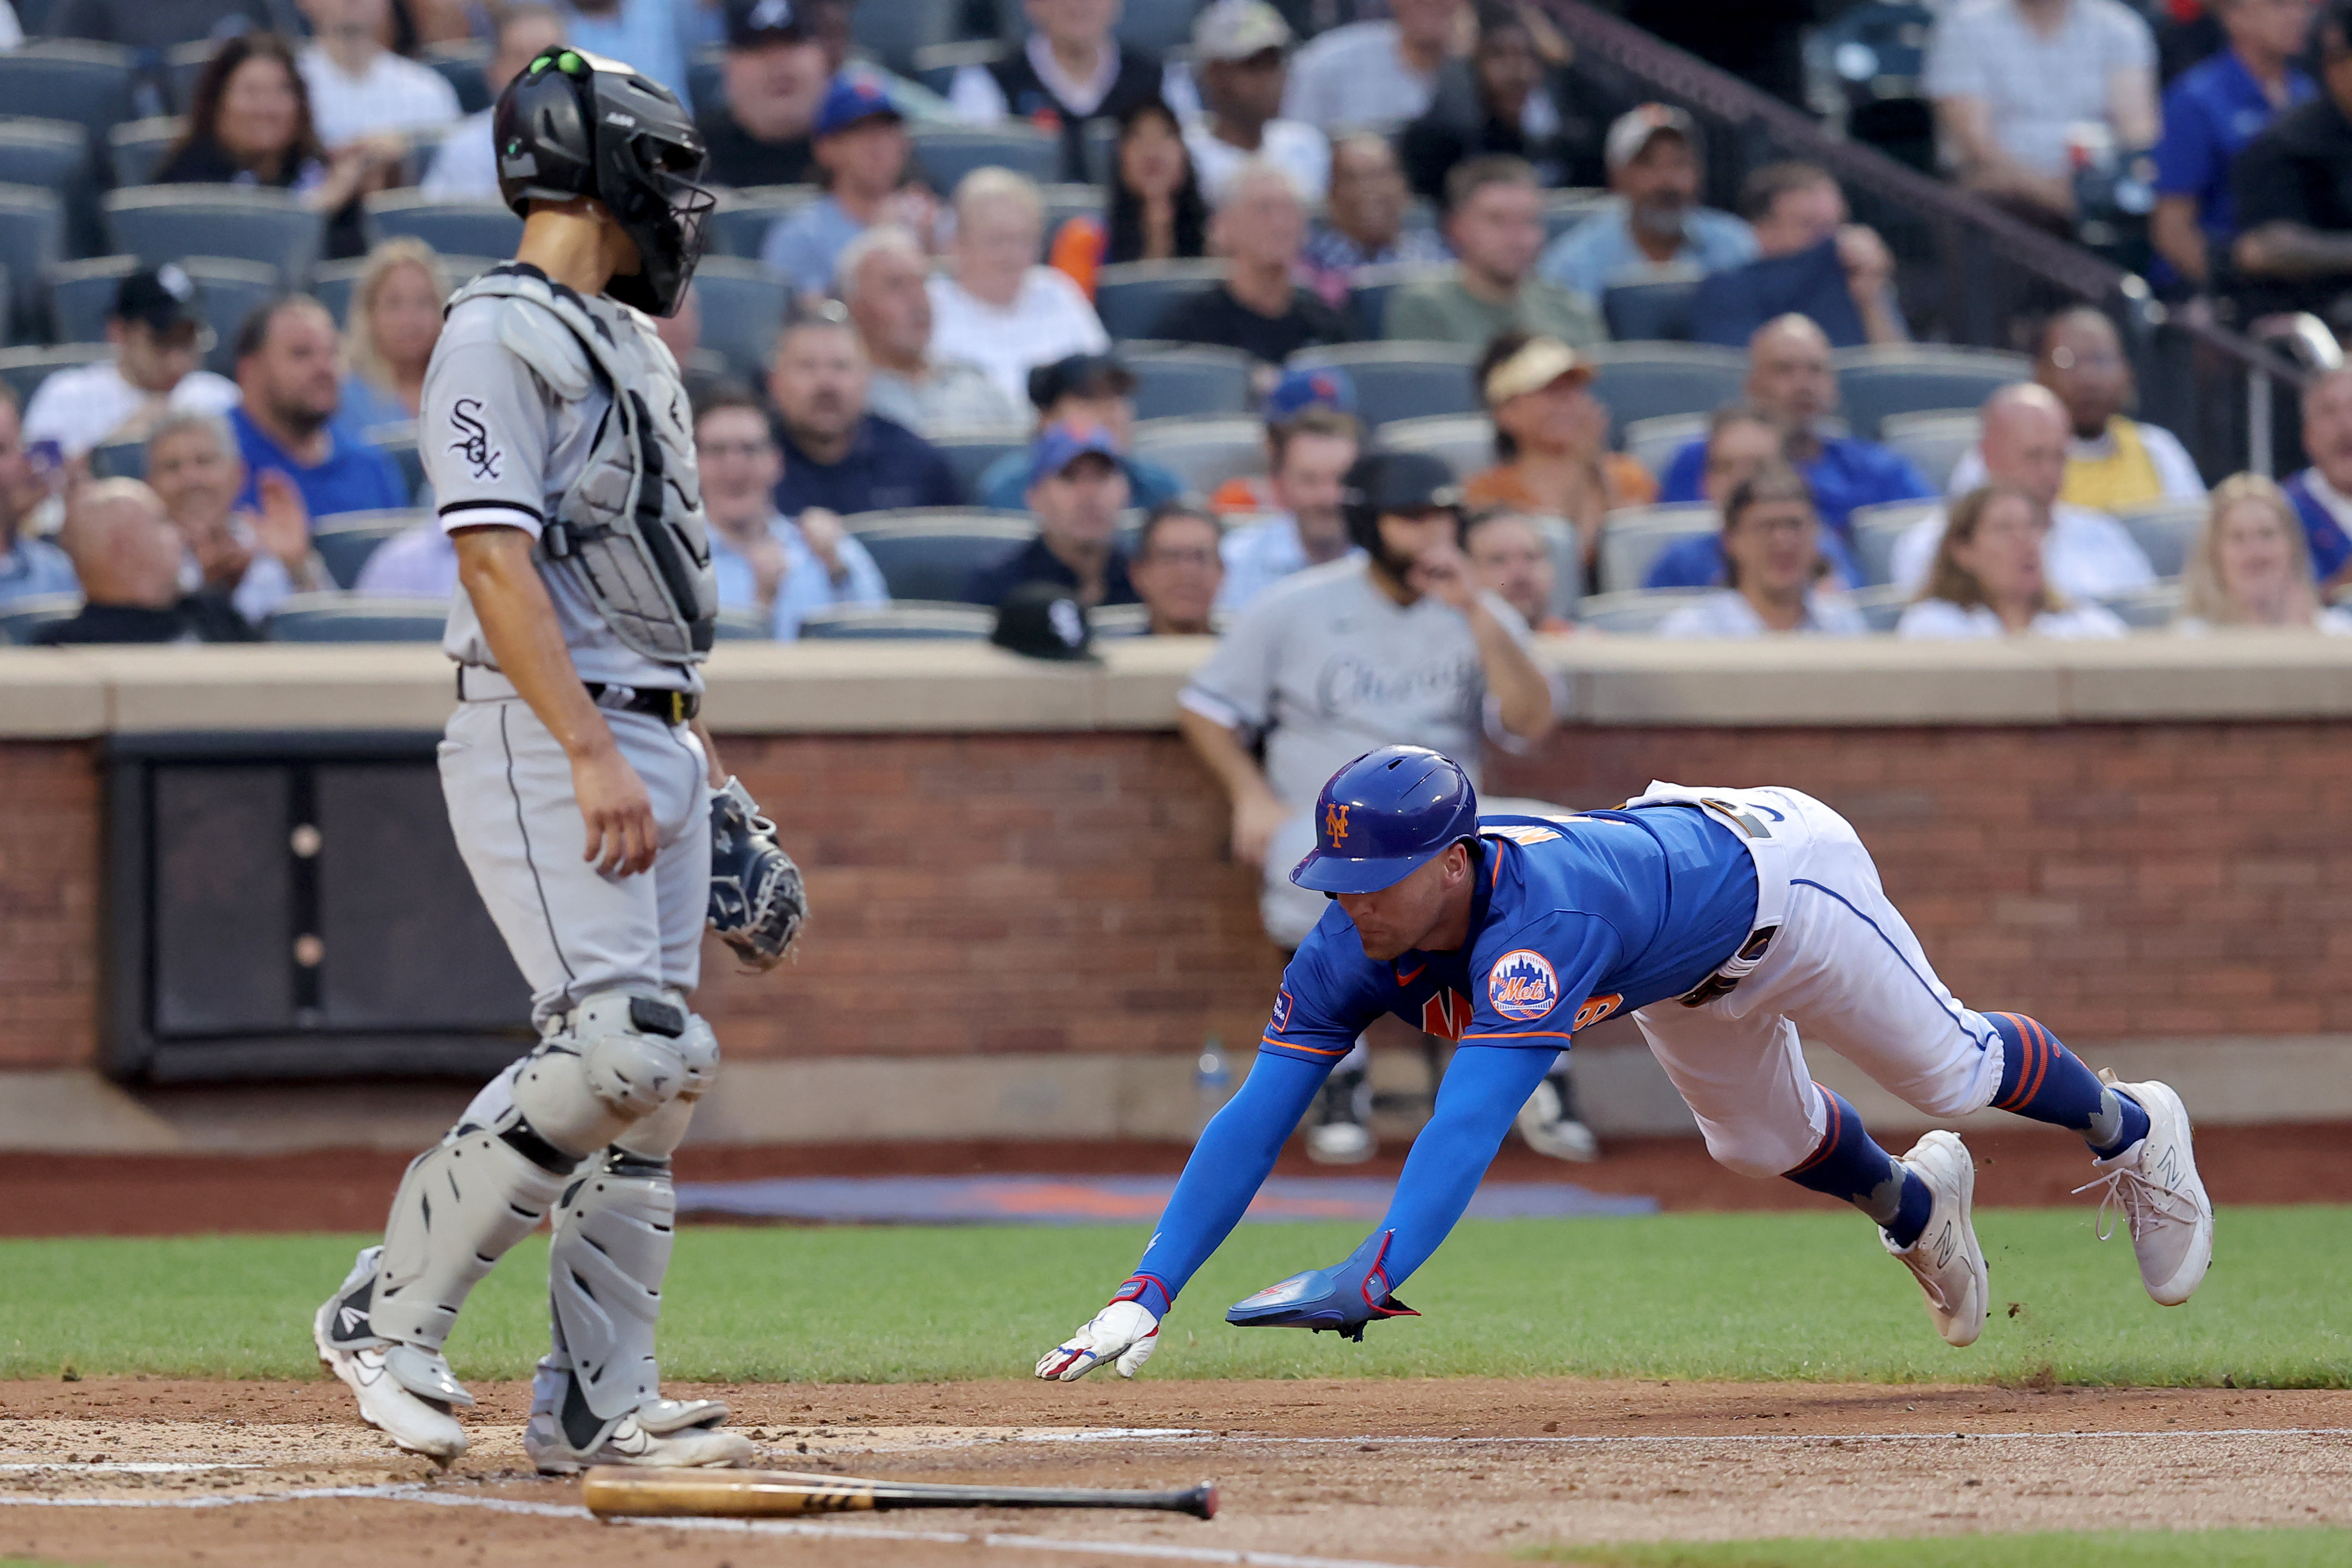 Francisco Alvarez (2 HRs), Mets just get by White Sox